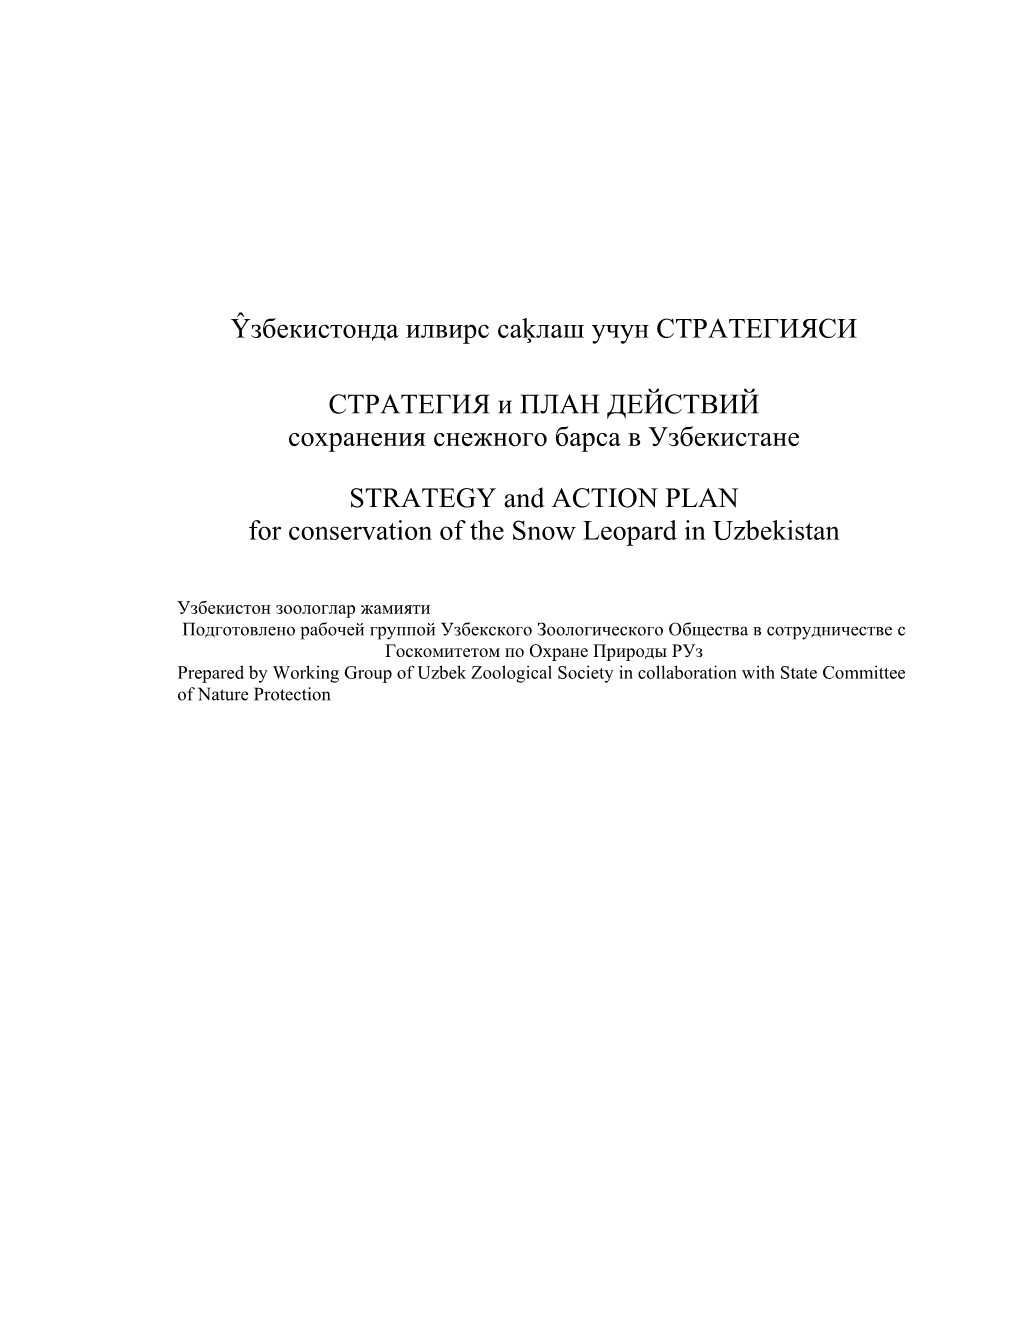 STRATEGY and ACTION PLAN for Conservation of the Snow Leopard in Uzbekistan